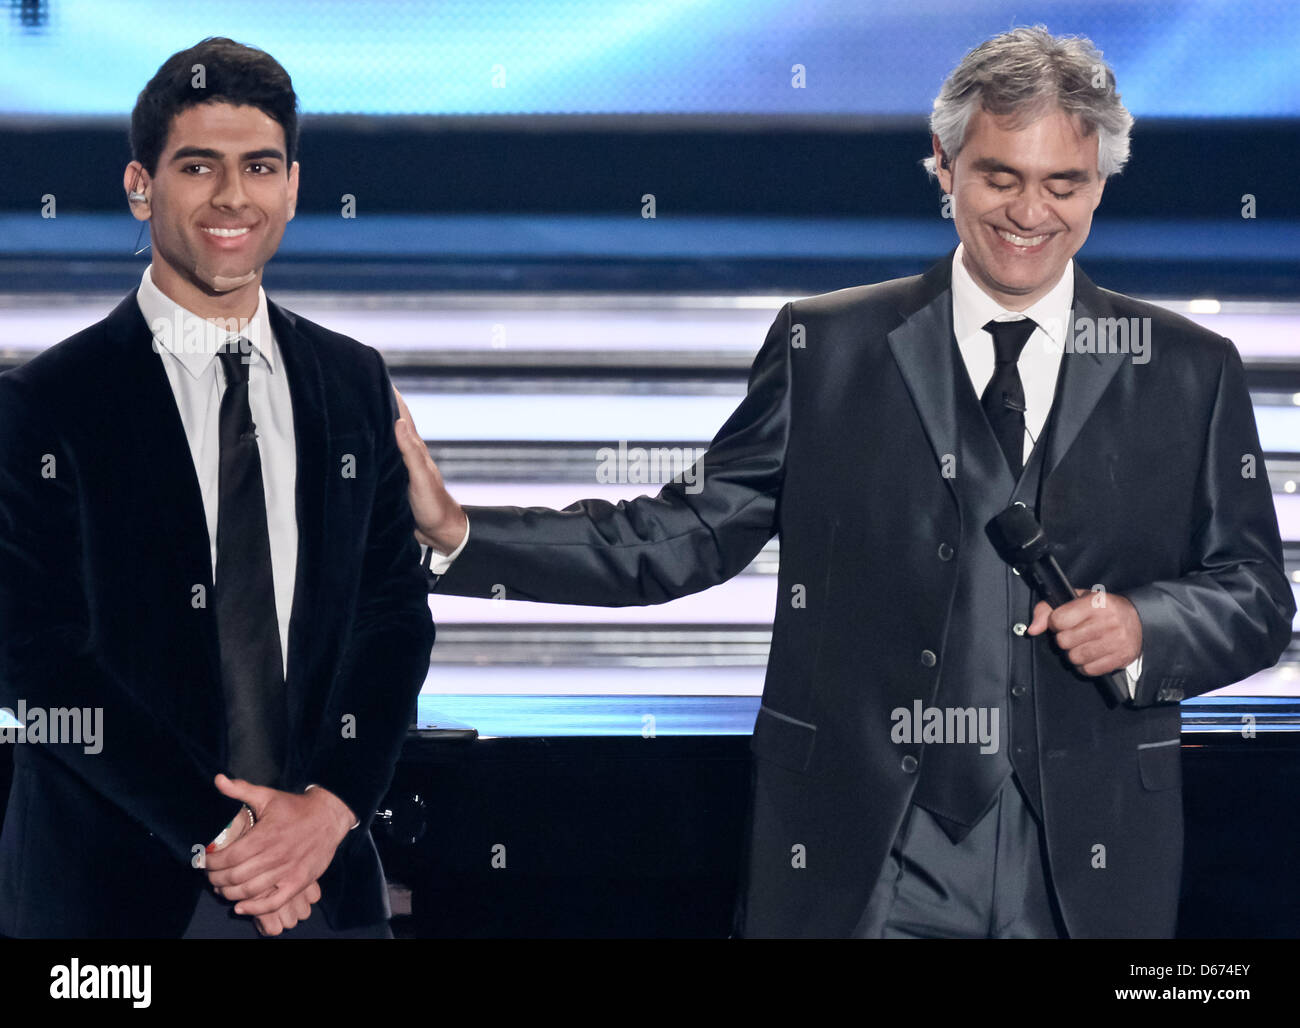 Amos bocelli and andrea bocelli hi-res stock photography and images - Alamy